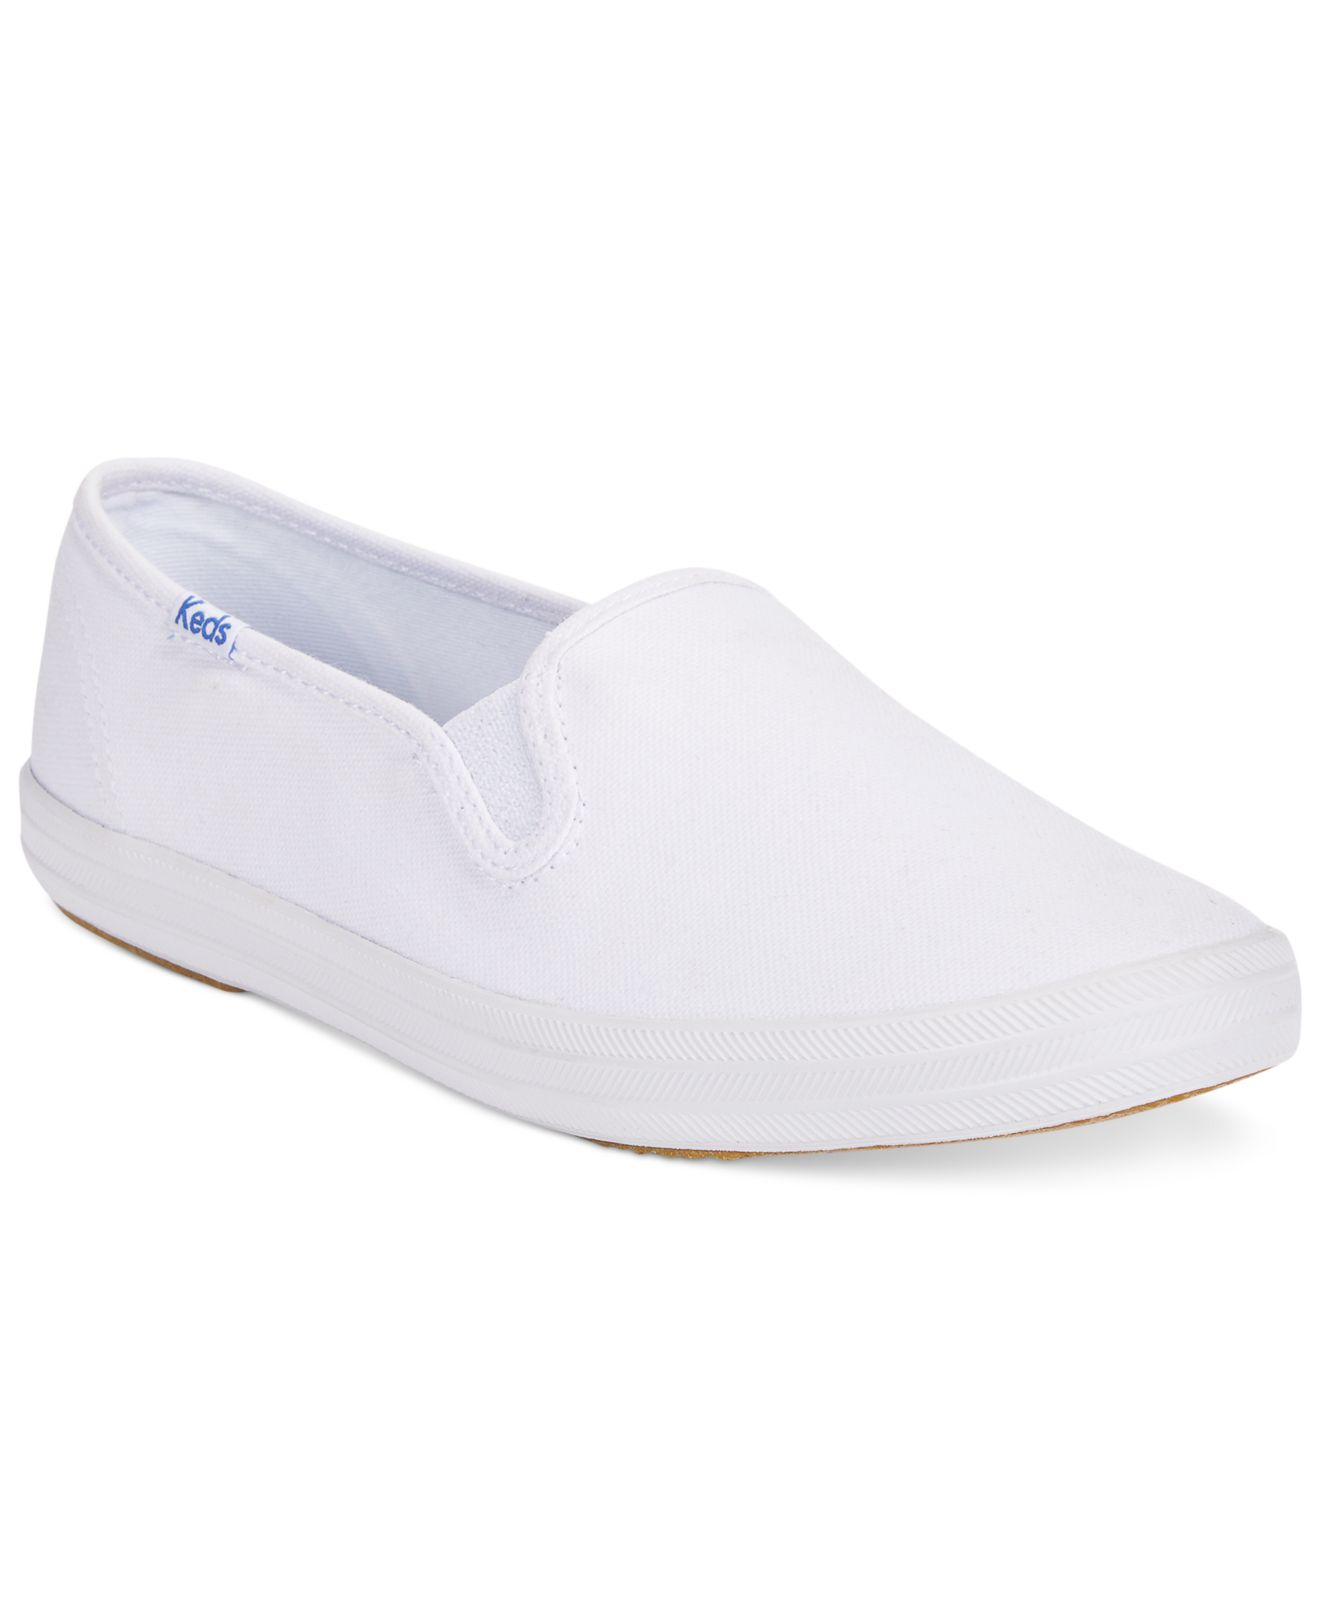 Keds Women's Champion Oxford Slip-on Sneakers in White | Lyst